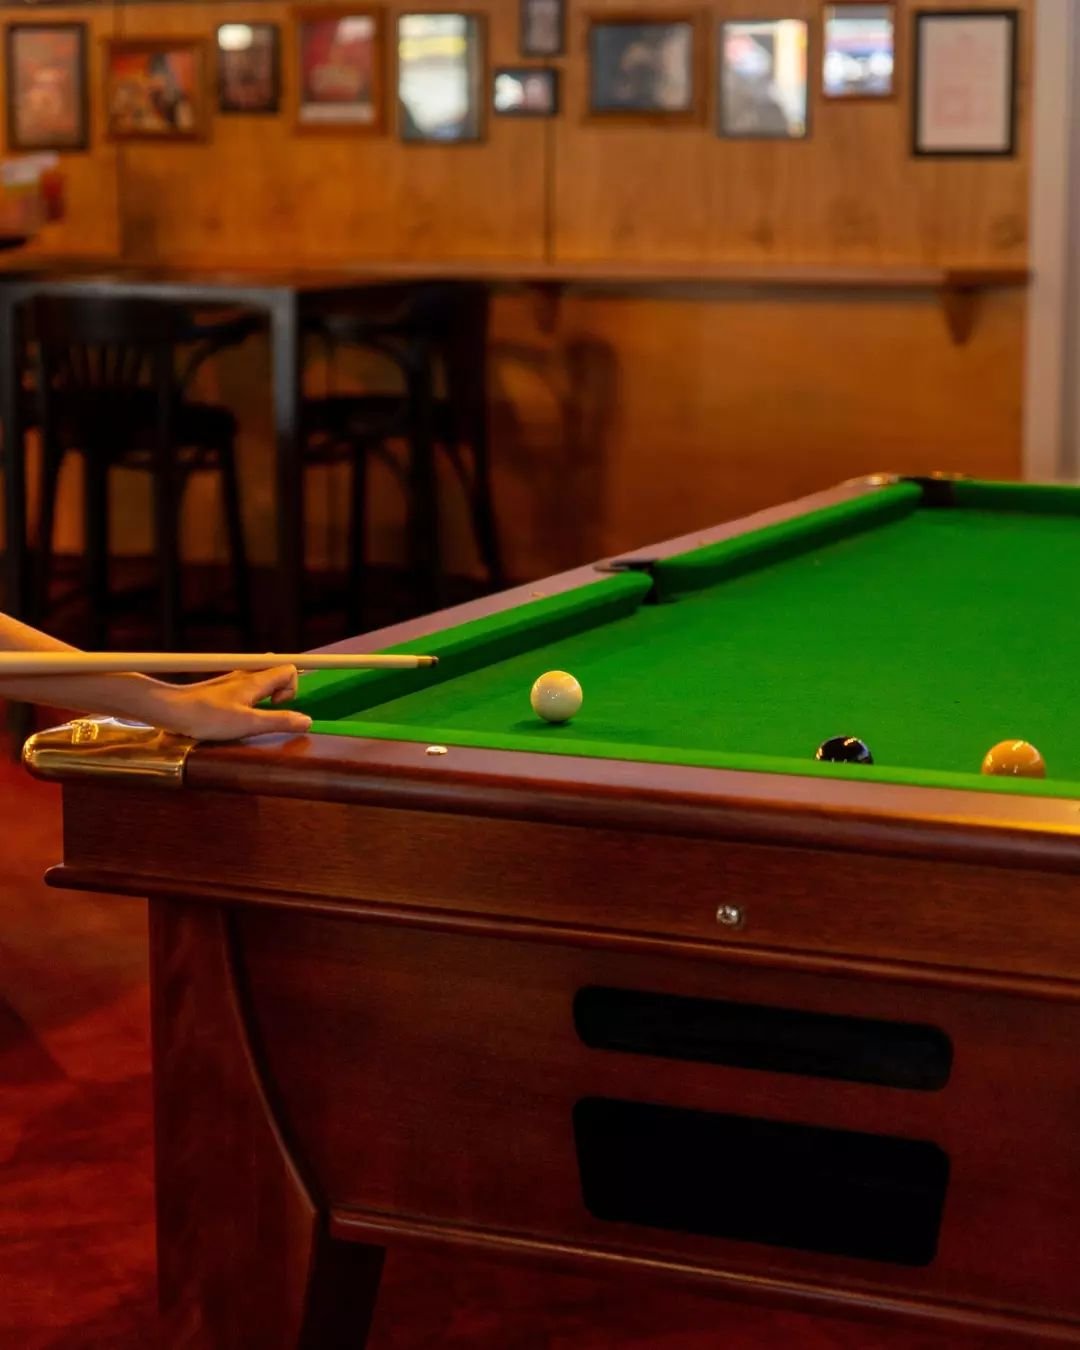 Show off your skills this weekend with FREE Pool Sundays&nbsp;🎱

We'll also be showing all AFL games so you can catch all the action live &amp; loud!